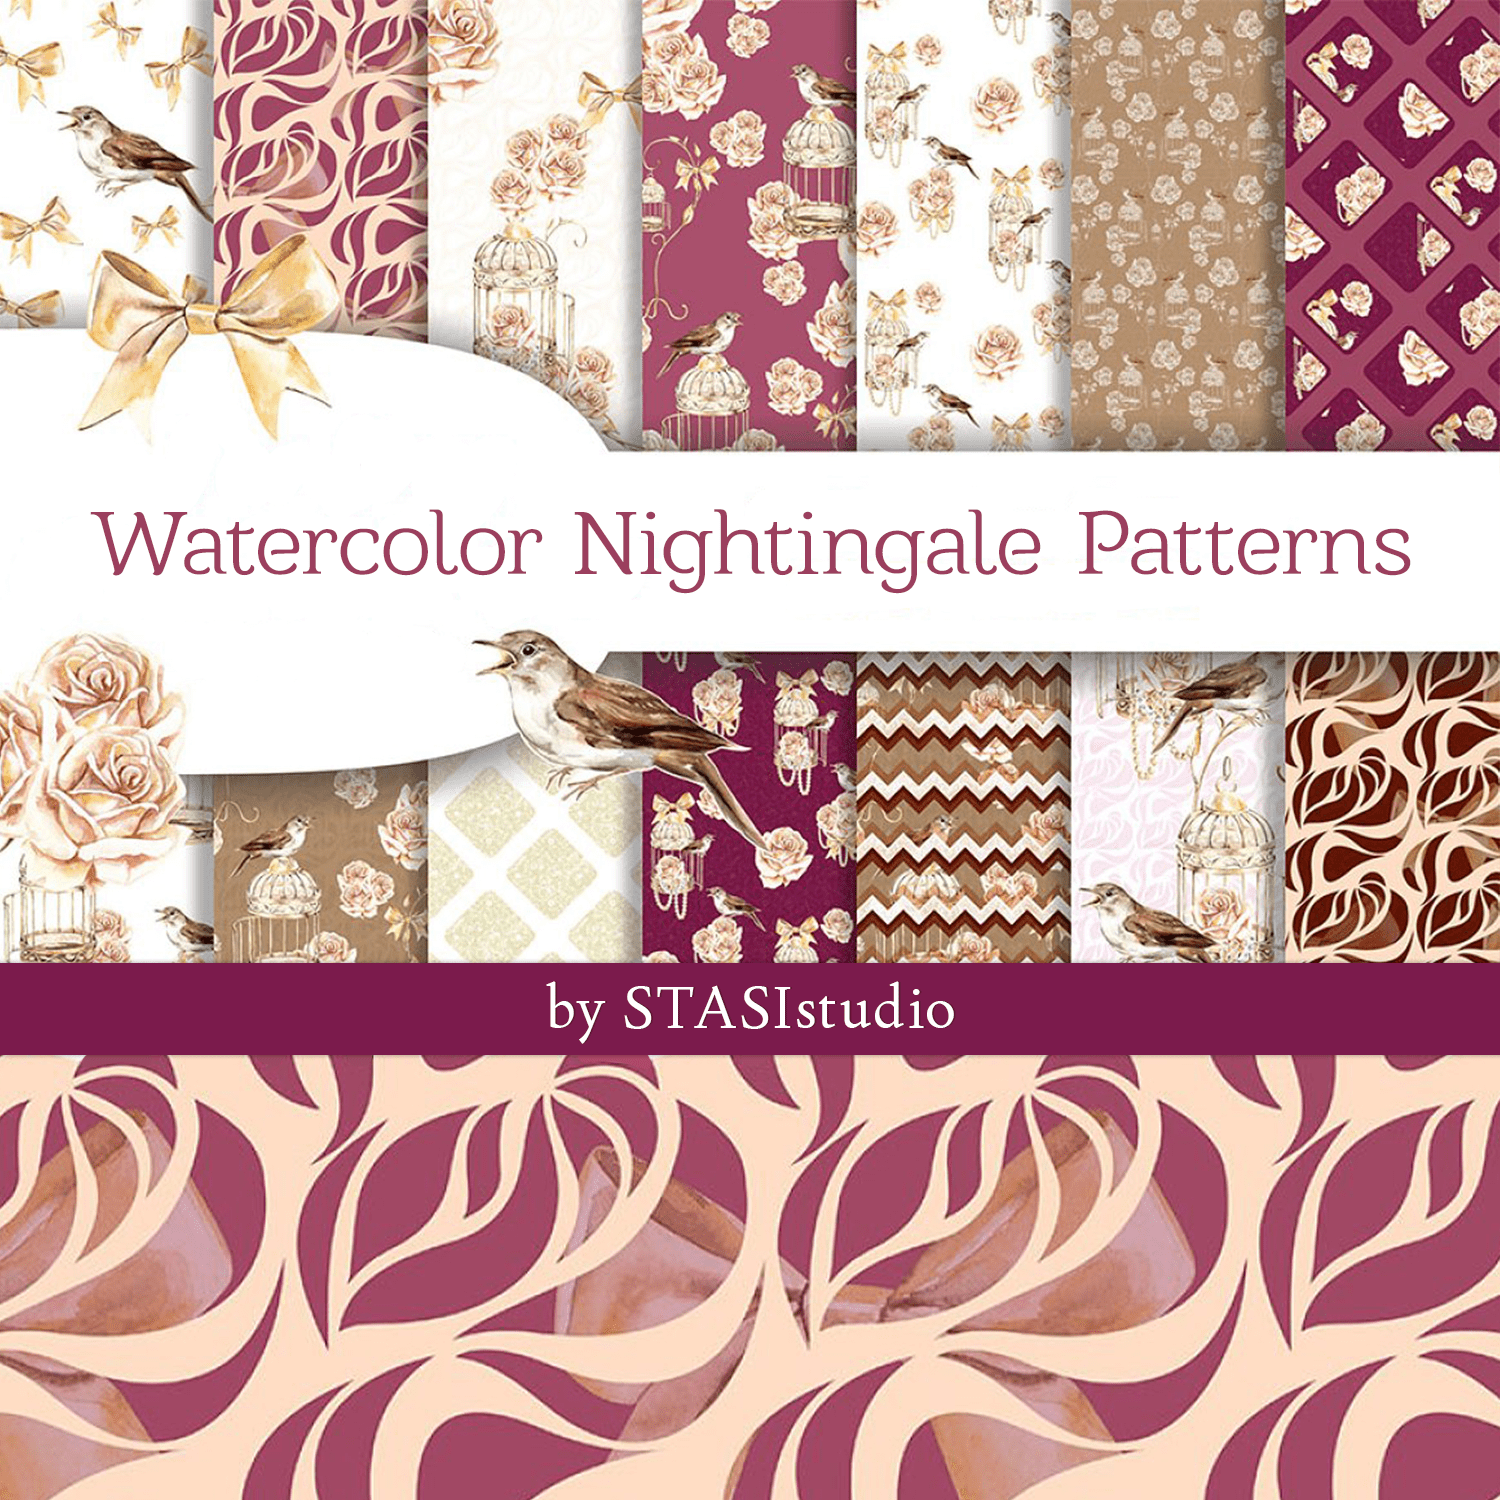 Watercolor Nightingale Patterns cover.